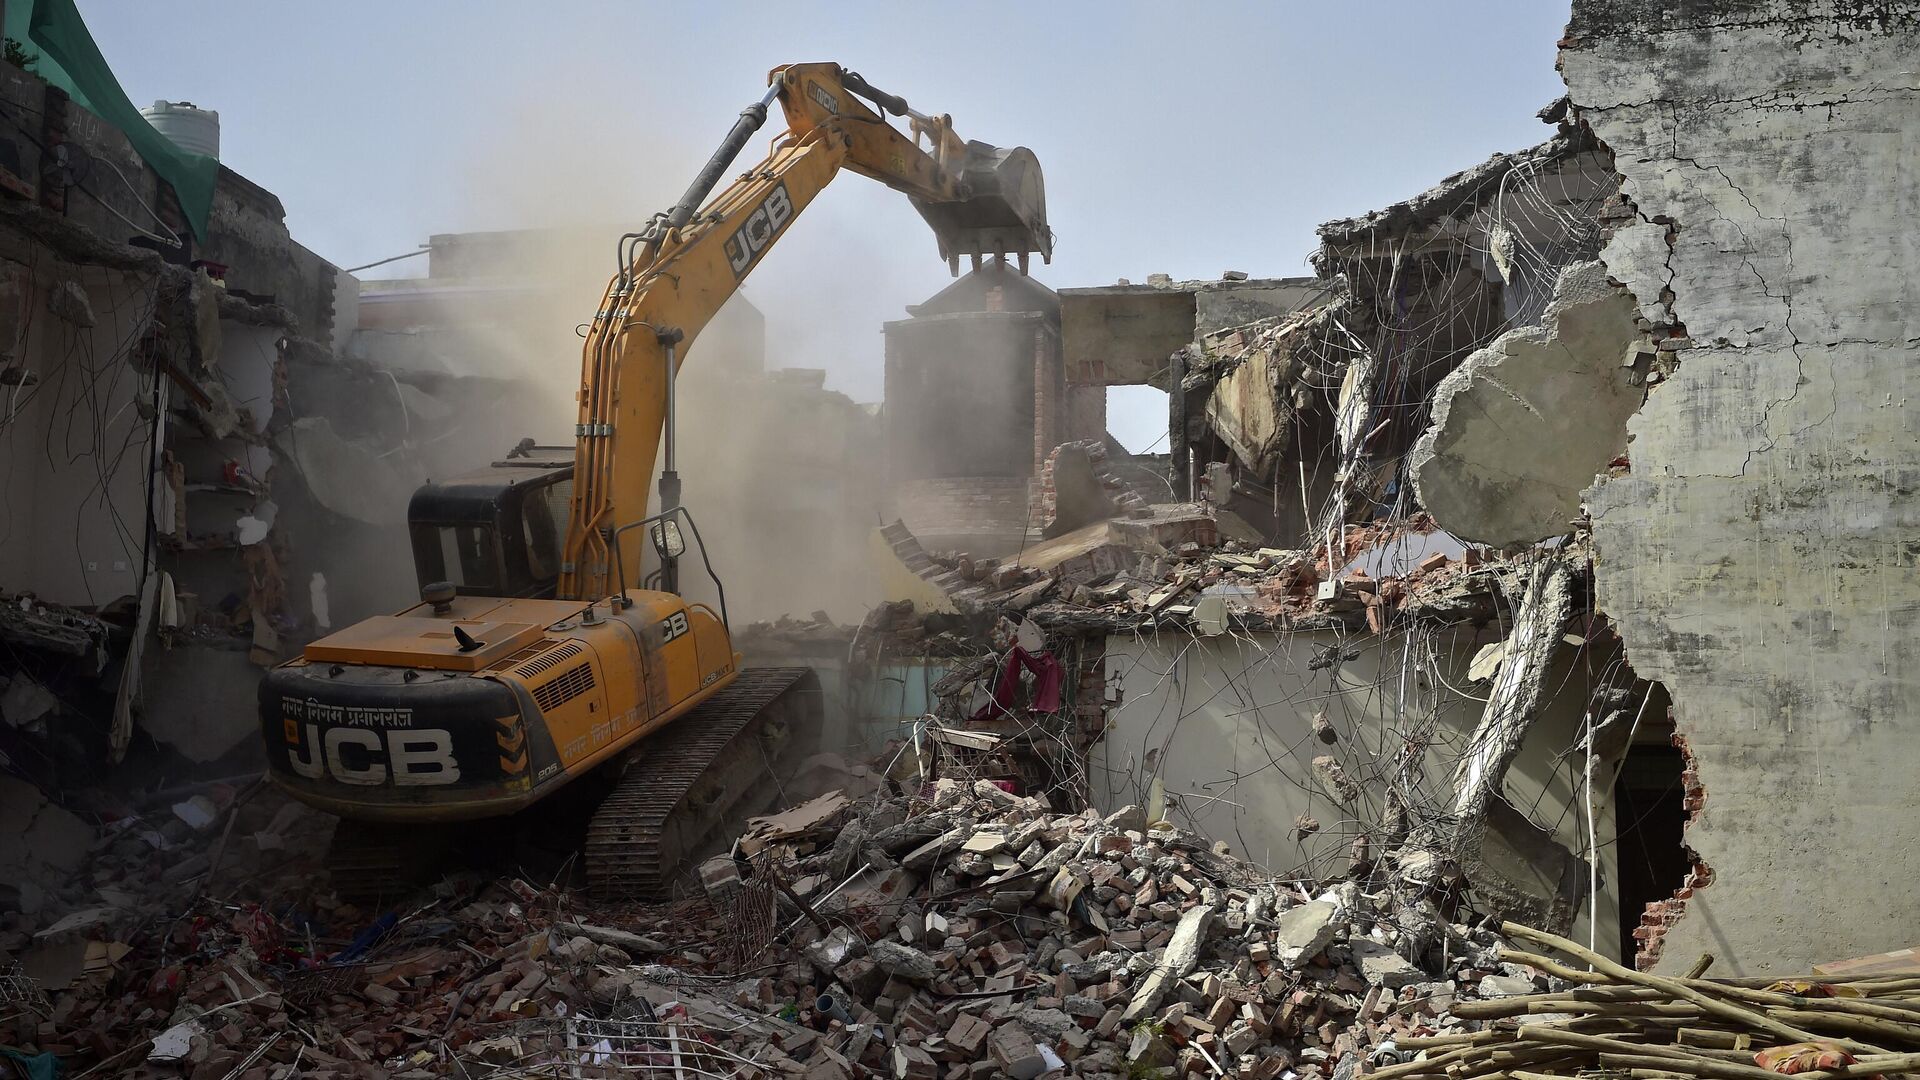 A bulldozer is being used to demolish the illegal structures of the residence of Javed Ahmed, a local leader who was allegedly involved in the recent violent protests against Bharatiya Janata Party (BJP) former spokeswoman Nupur Sharma's incendiary remarks about Prophet Mohammed, in Allahabad on June 12, 2022 - Sputnik International, 1920, 22.06.2022